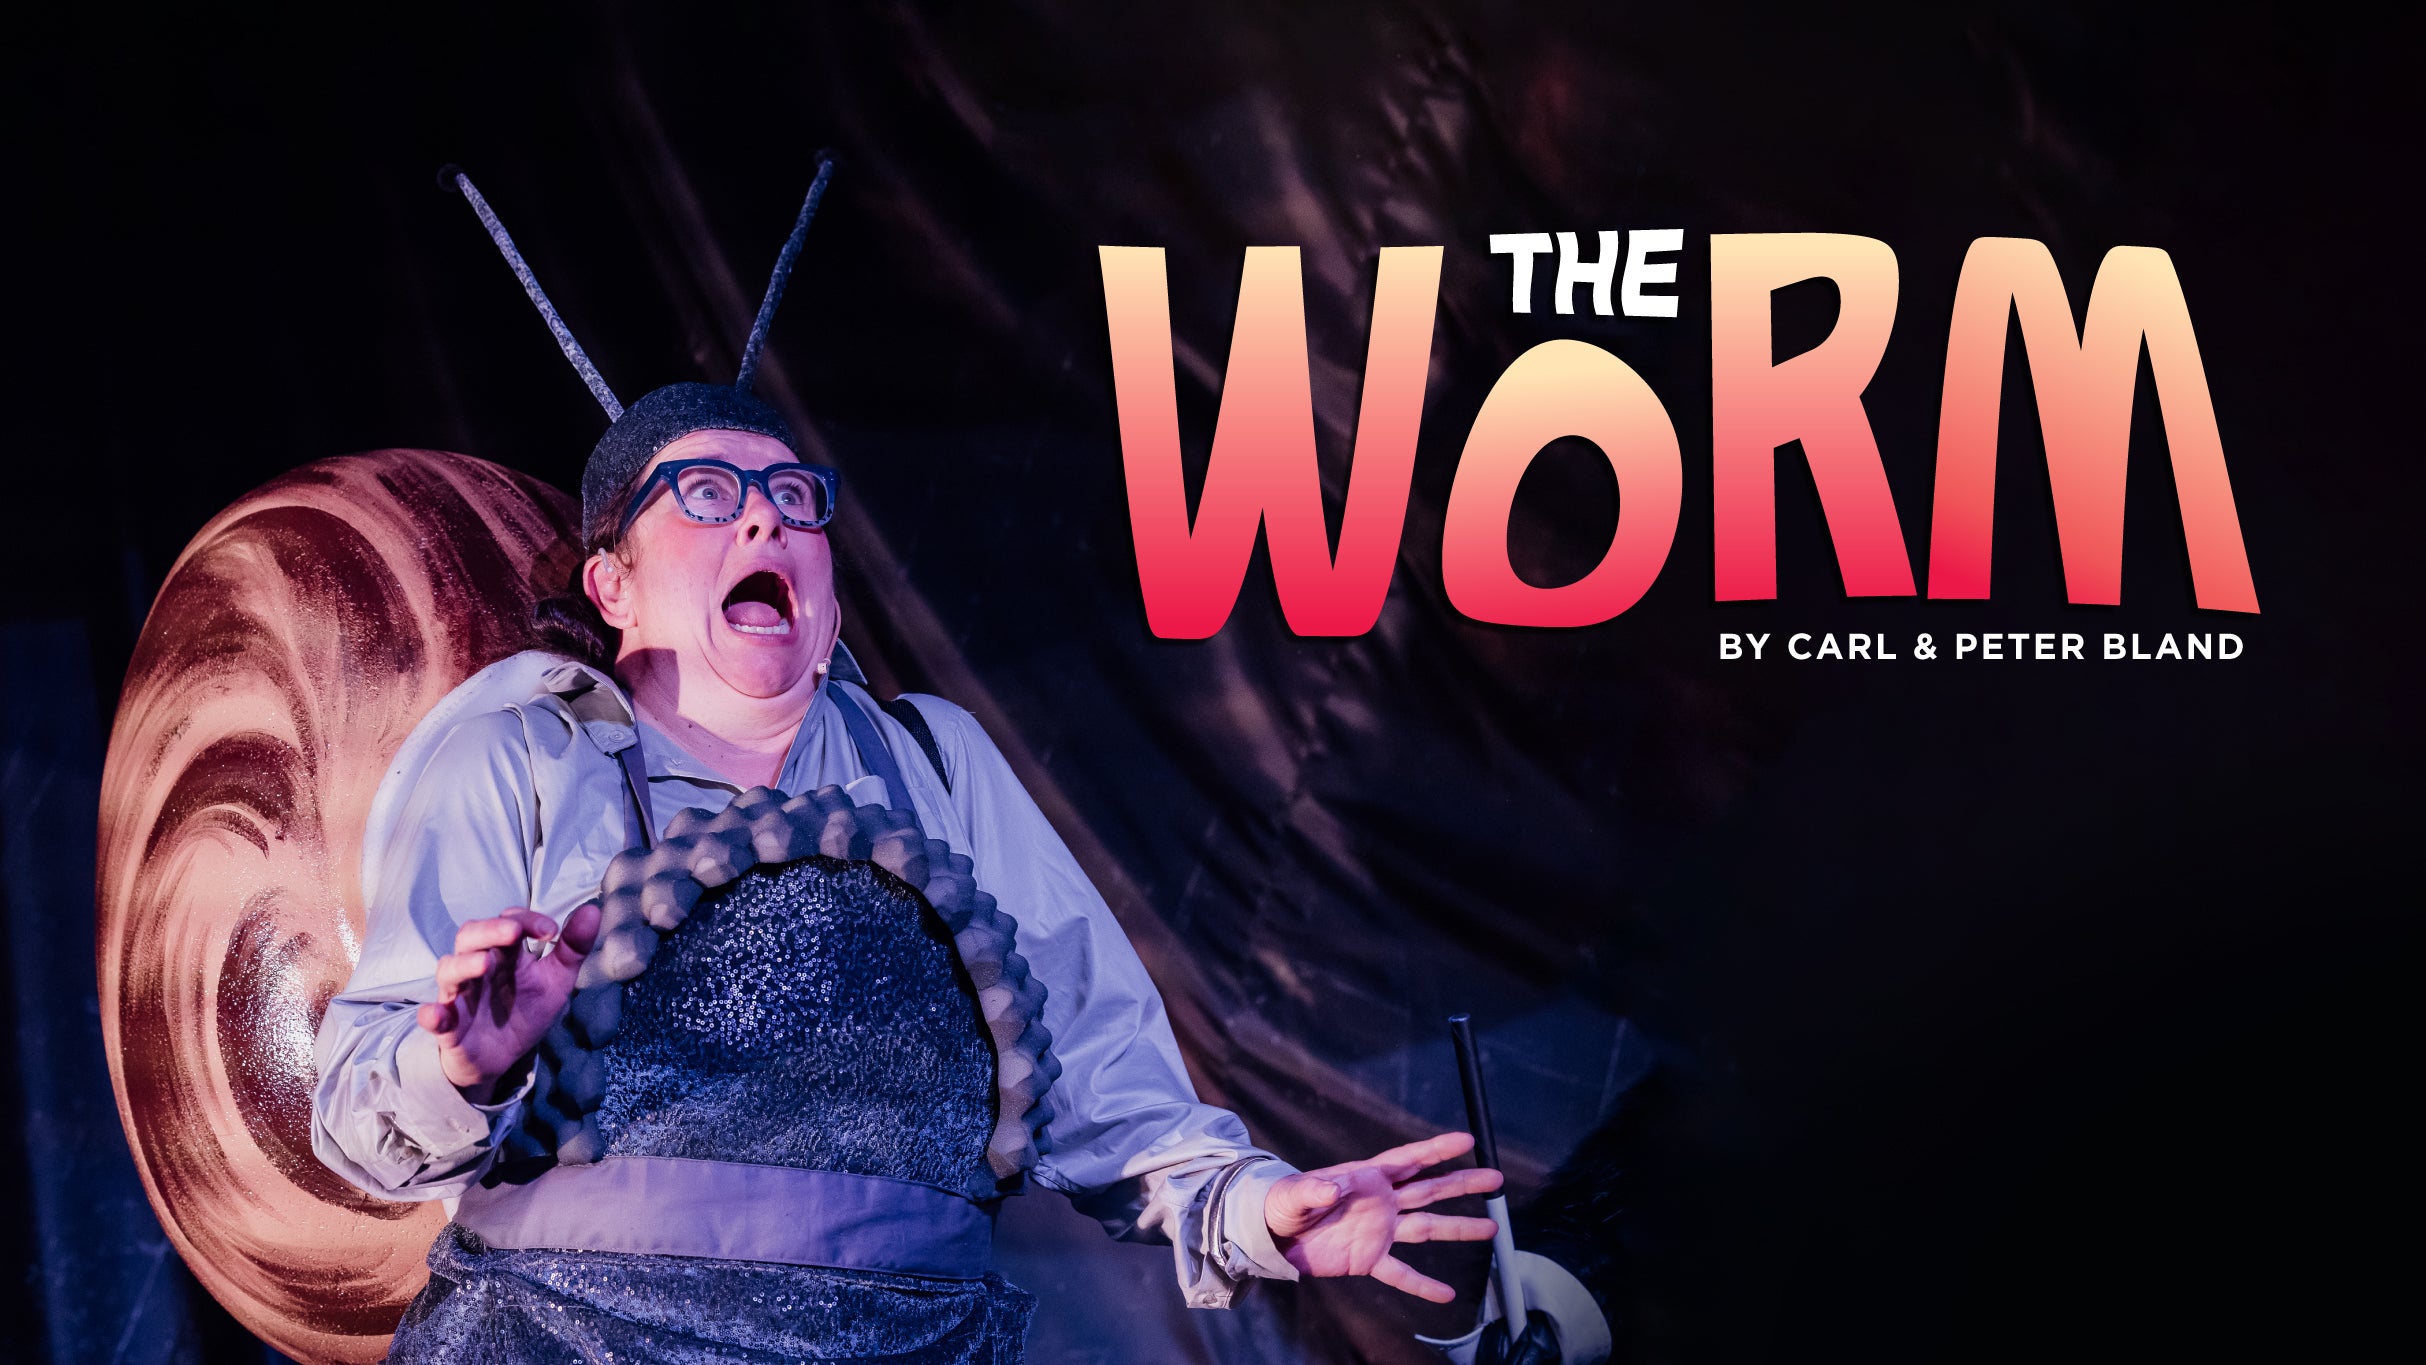 Image used with permission from Ticketmaster | The Worm tickets